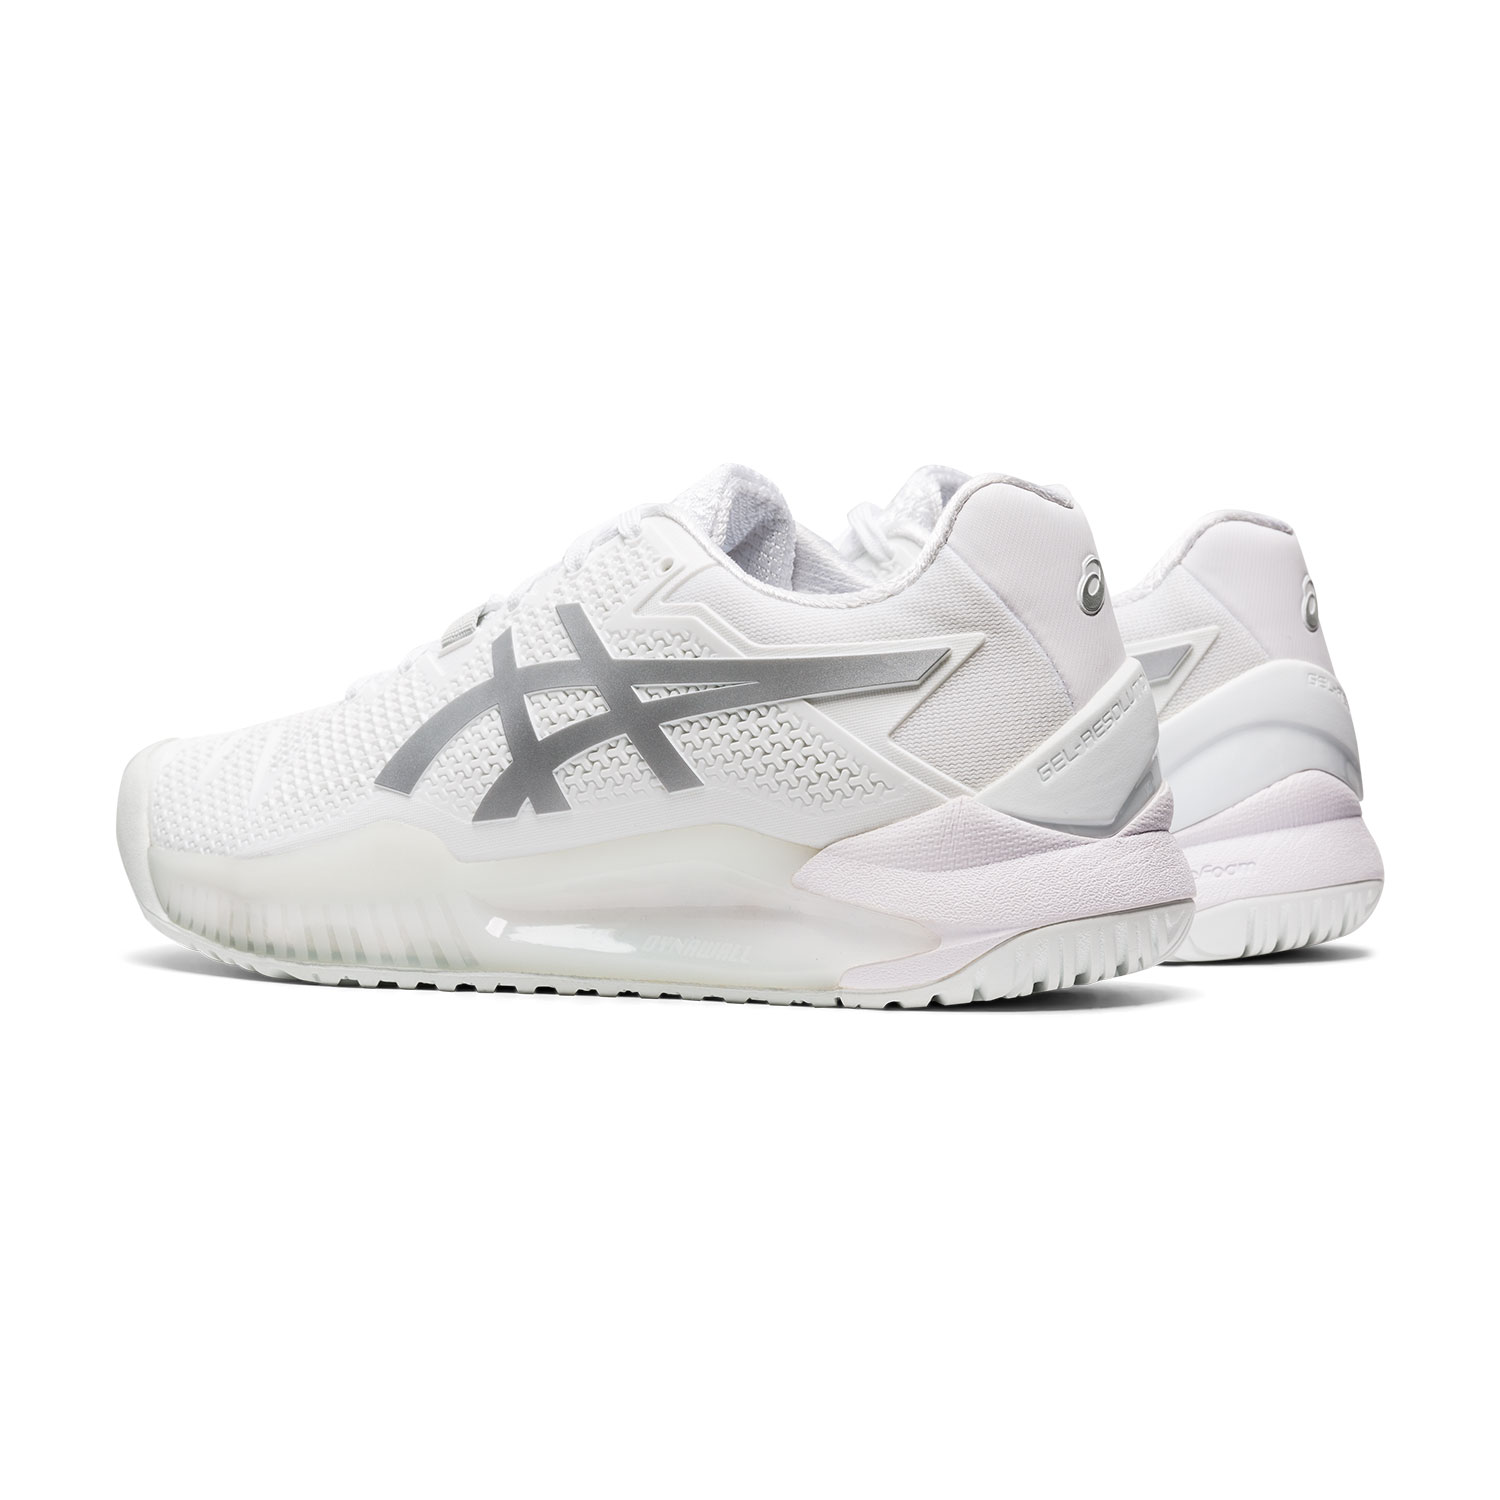 Asics Gel Resolution 8 - White/Pure Silver